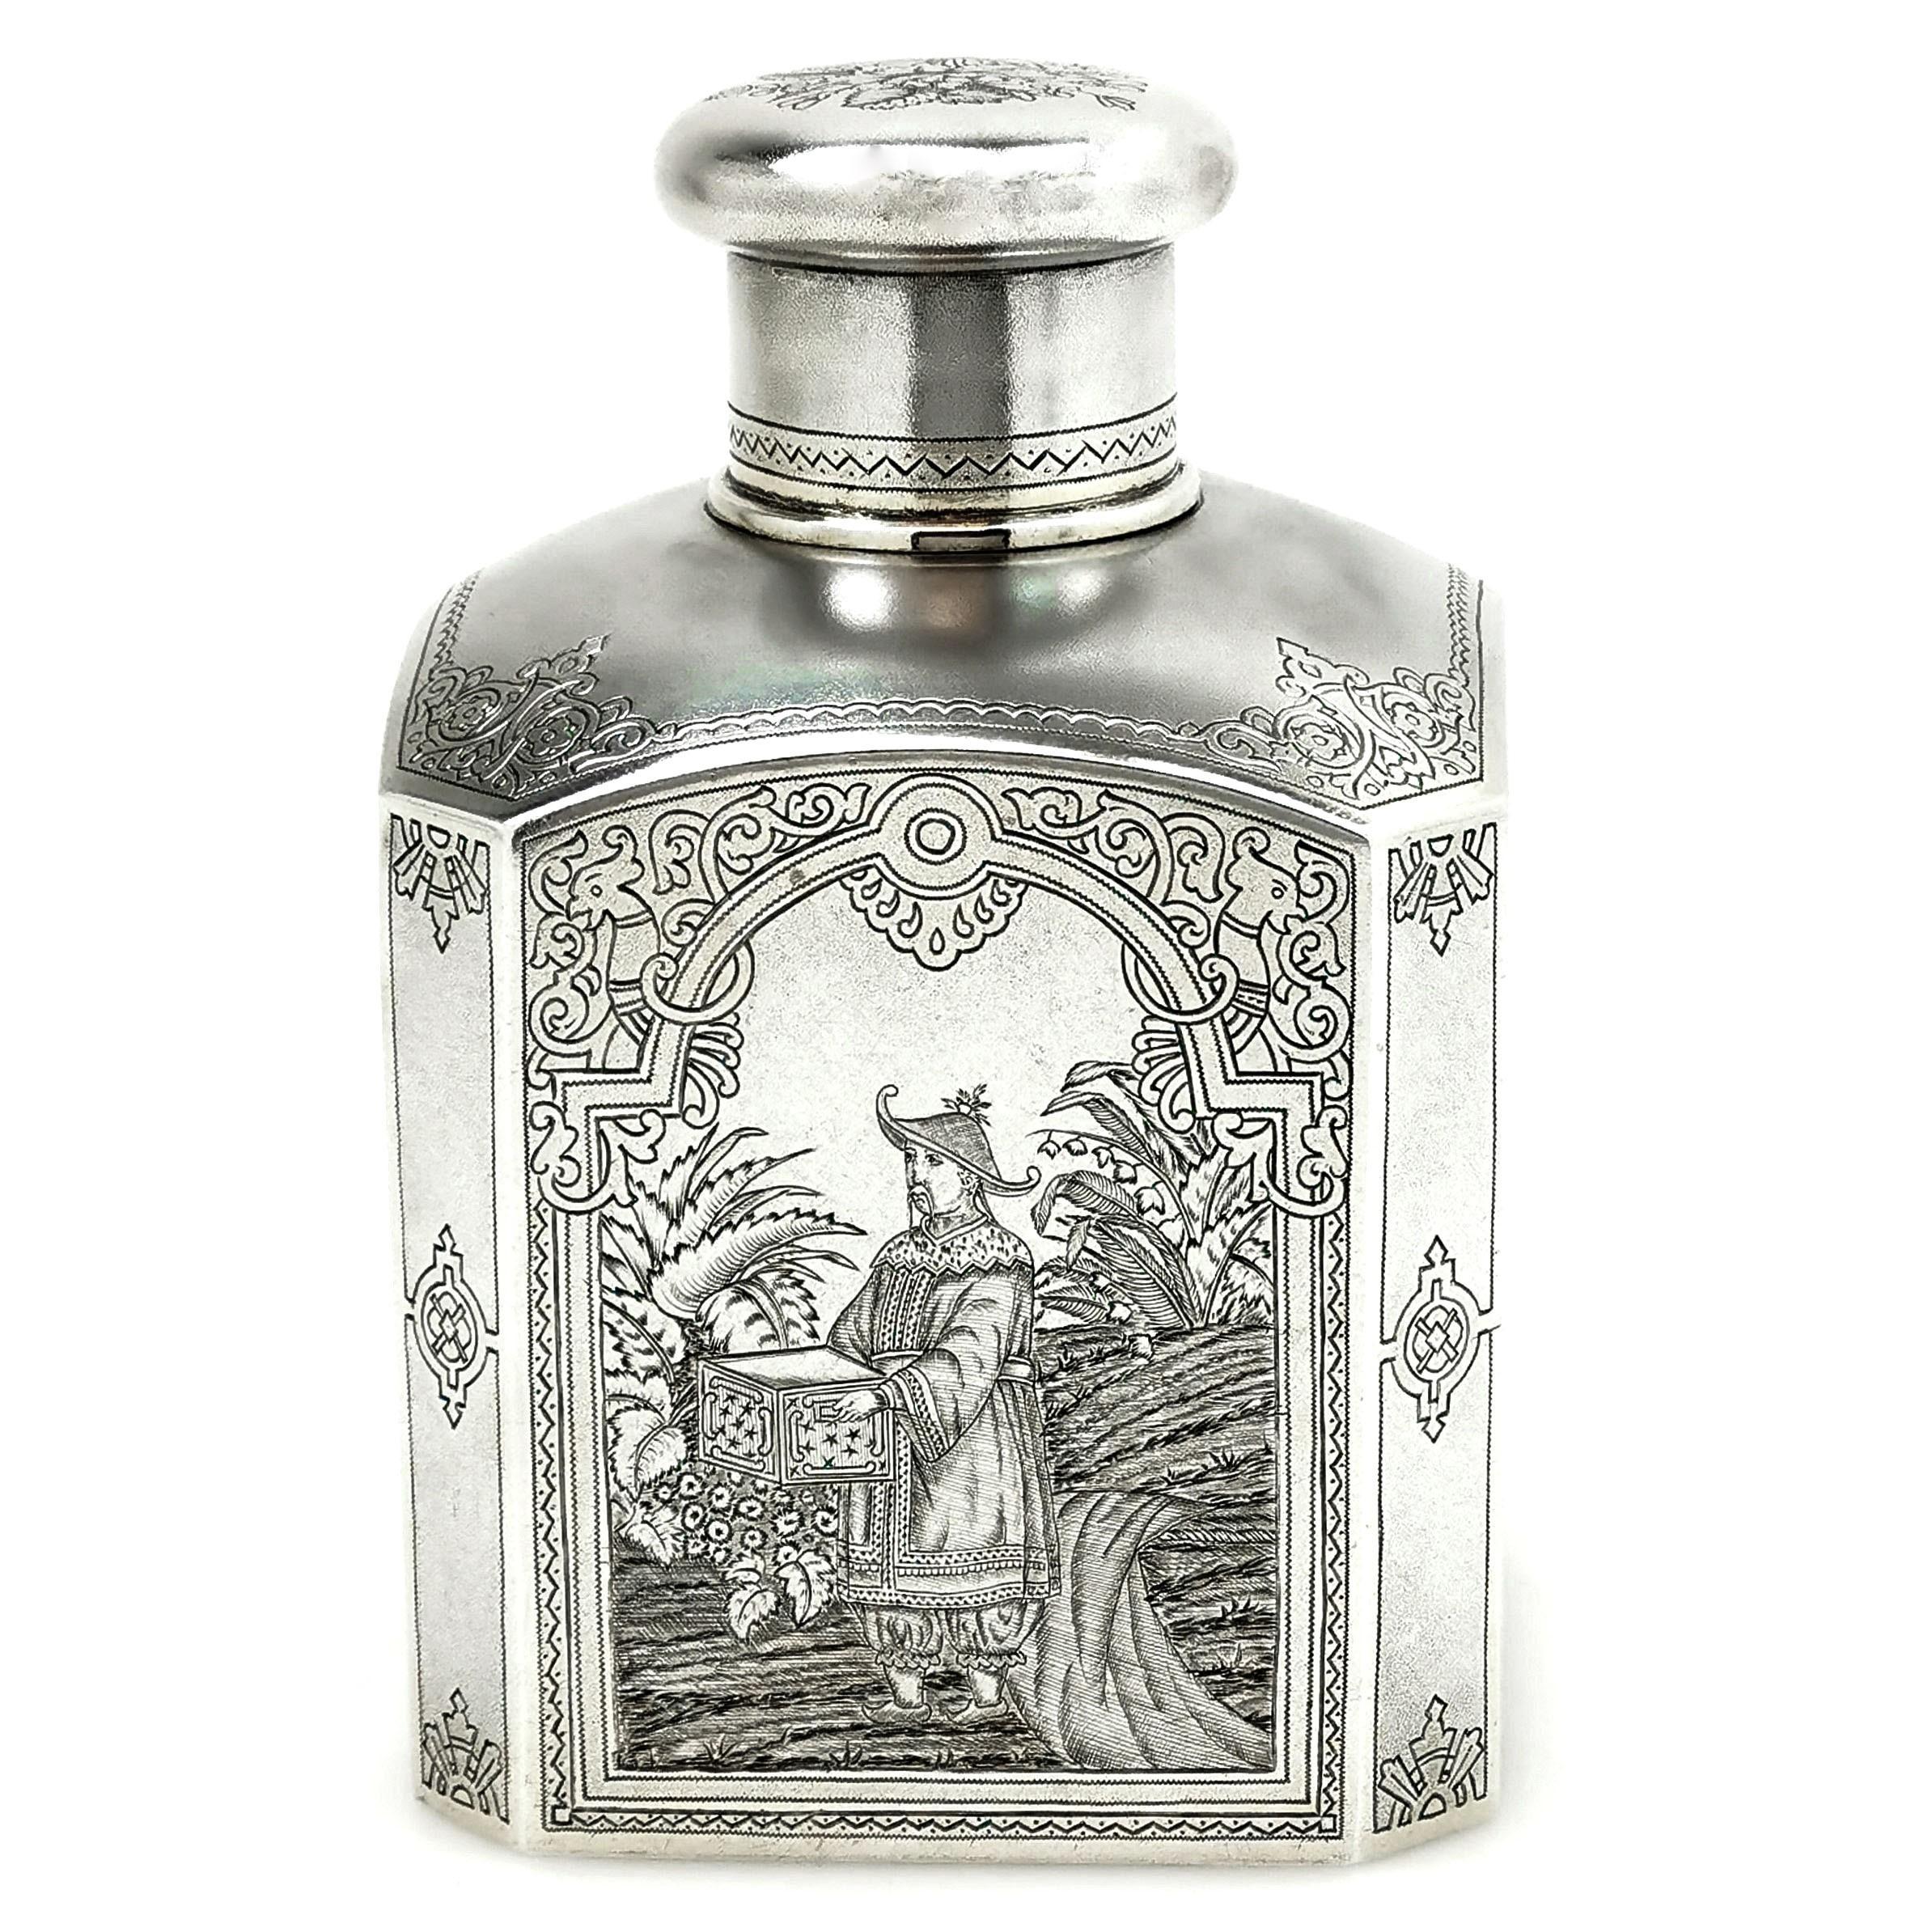 A beautiful Antique Russian Solid Silver Tea Caddy decorated with beautiful Chinoiserie Style images. The square cut corner Tea Caddy has an engraved Chinese / Asian Style image on each side as well as decorative borders and an floral engraving on